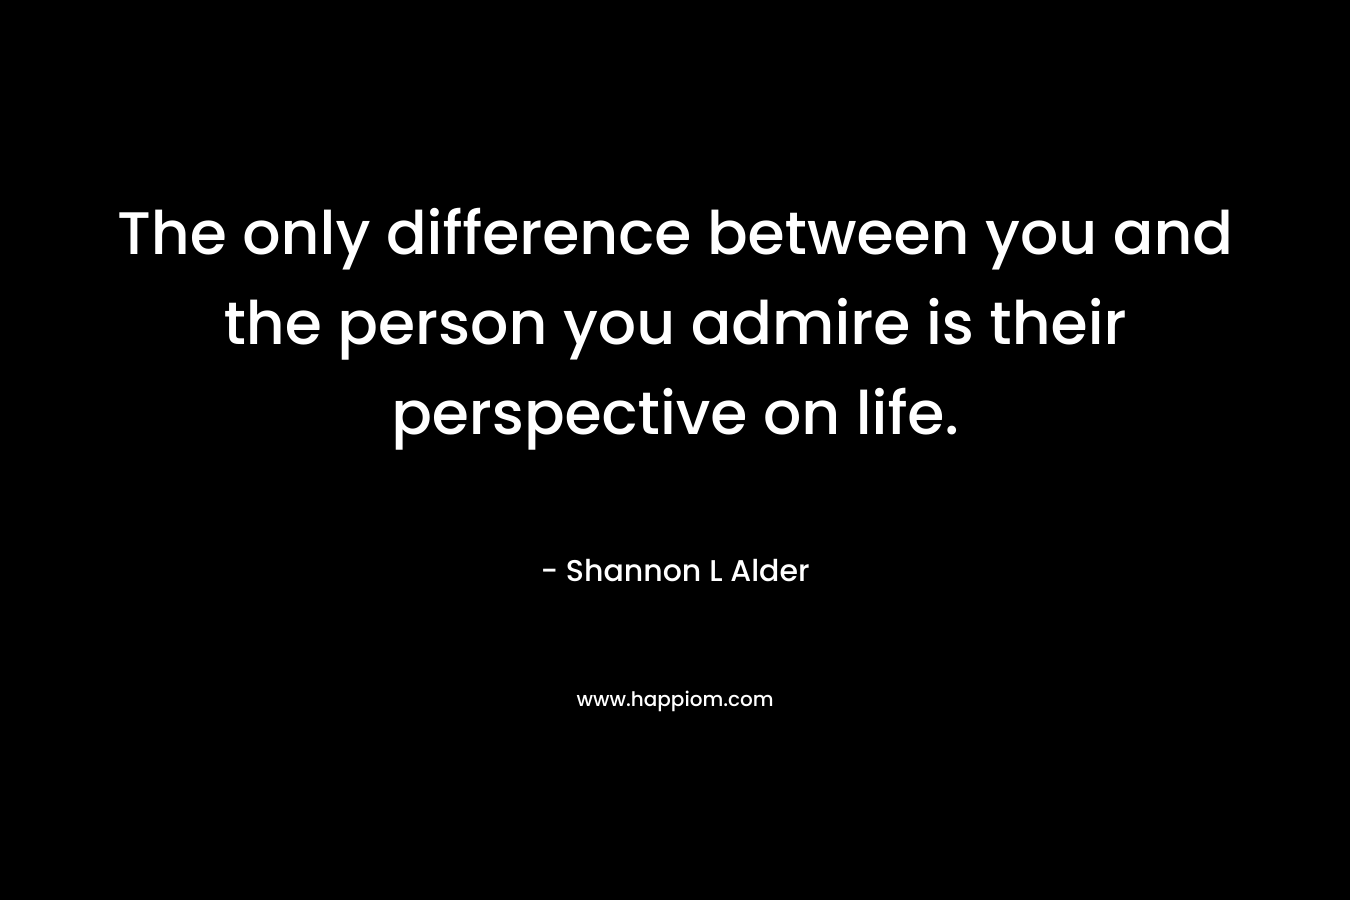 The only difference between you and the person you admire is their perspective on life.